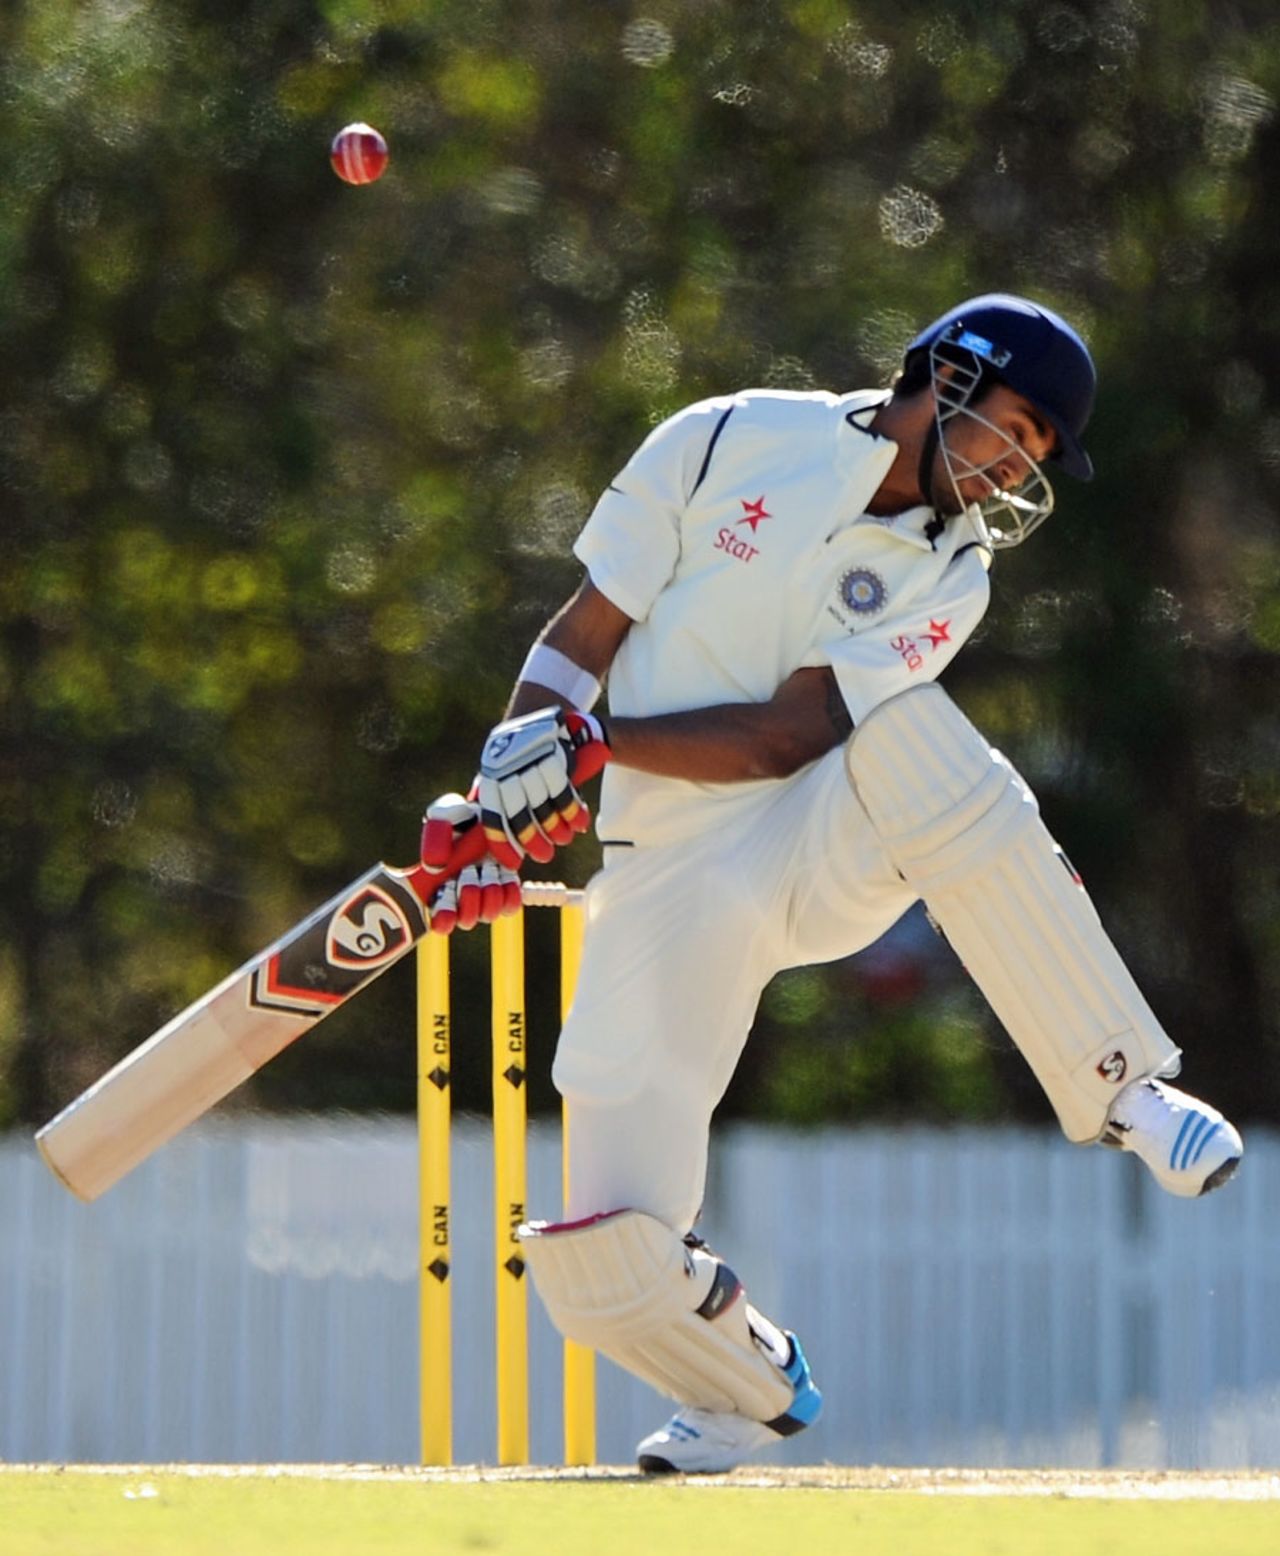 KL Rahul swerves to avoid a short delivery, Australia A v India A, 1st unofficial Test, Brisbane, 1st day, July 6, 2014